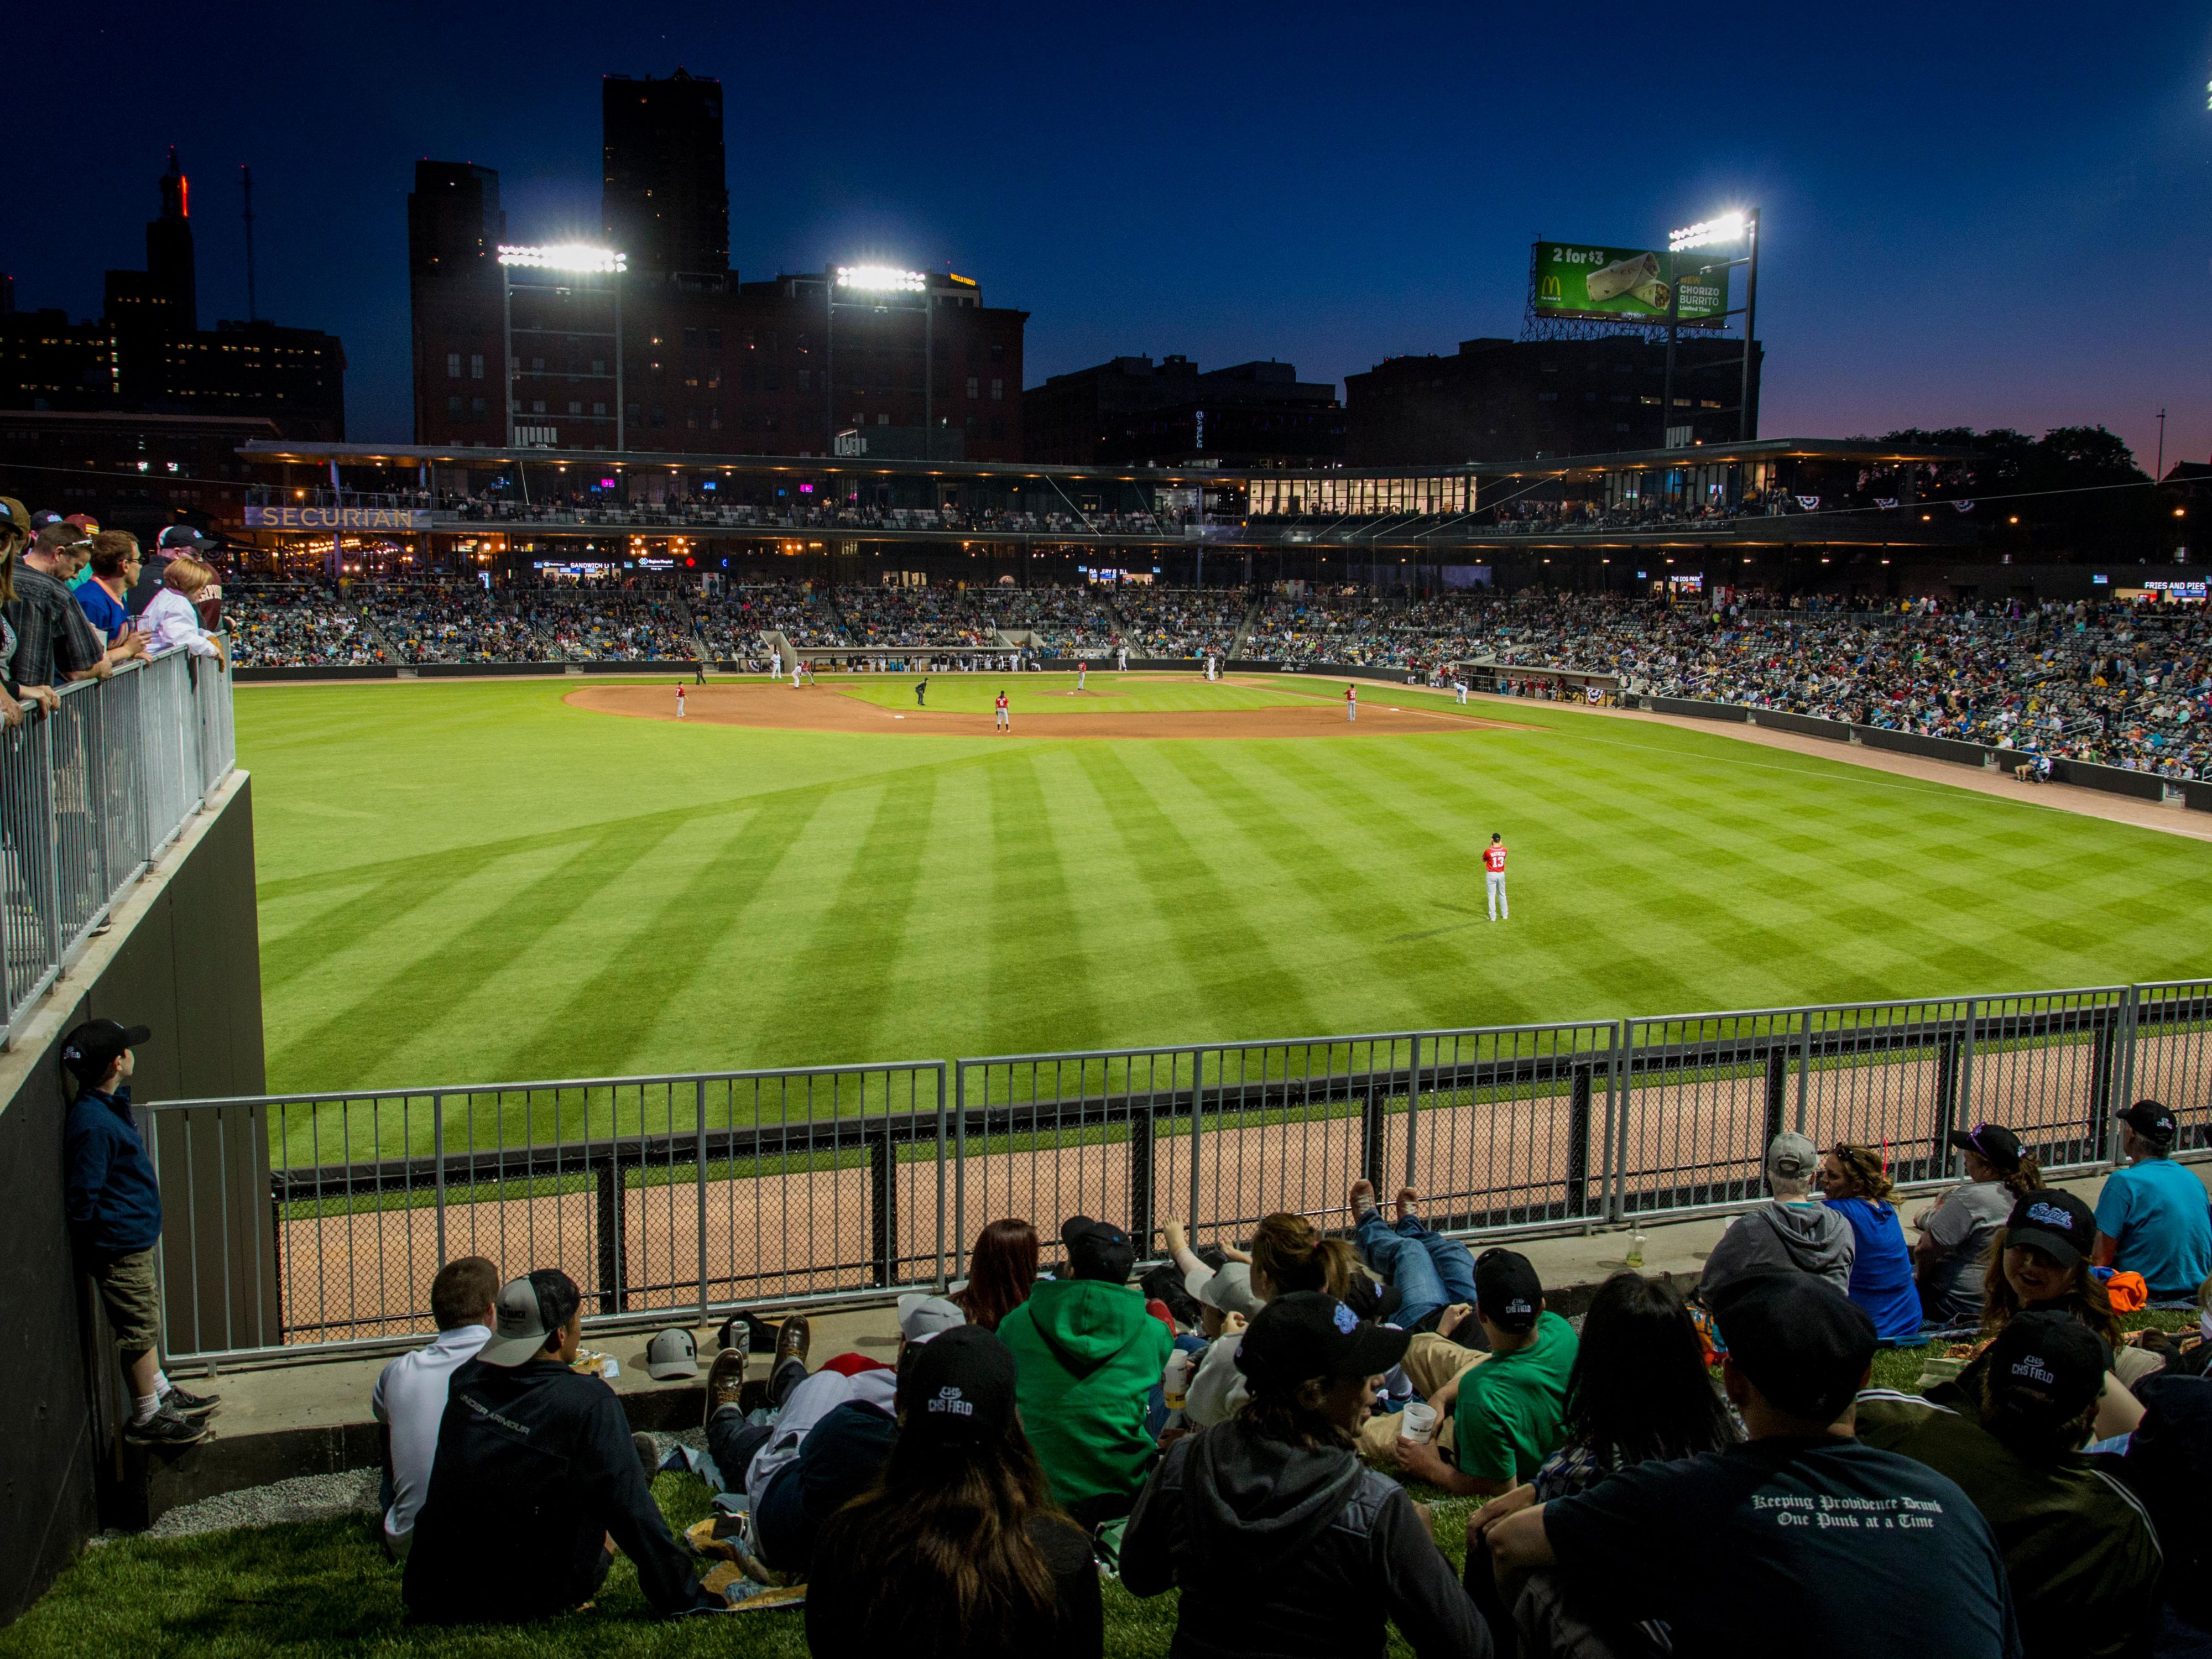 We are only one mile from CHS Field, which is the host stadium to the St. Paul Saints Baseball Club. Take advantage of our complimentary shuttle to and from games (based on availability).